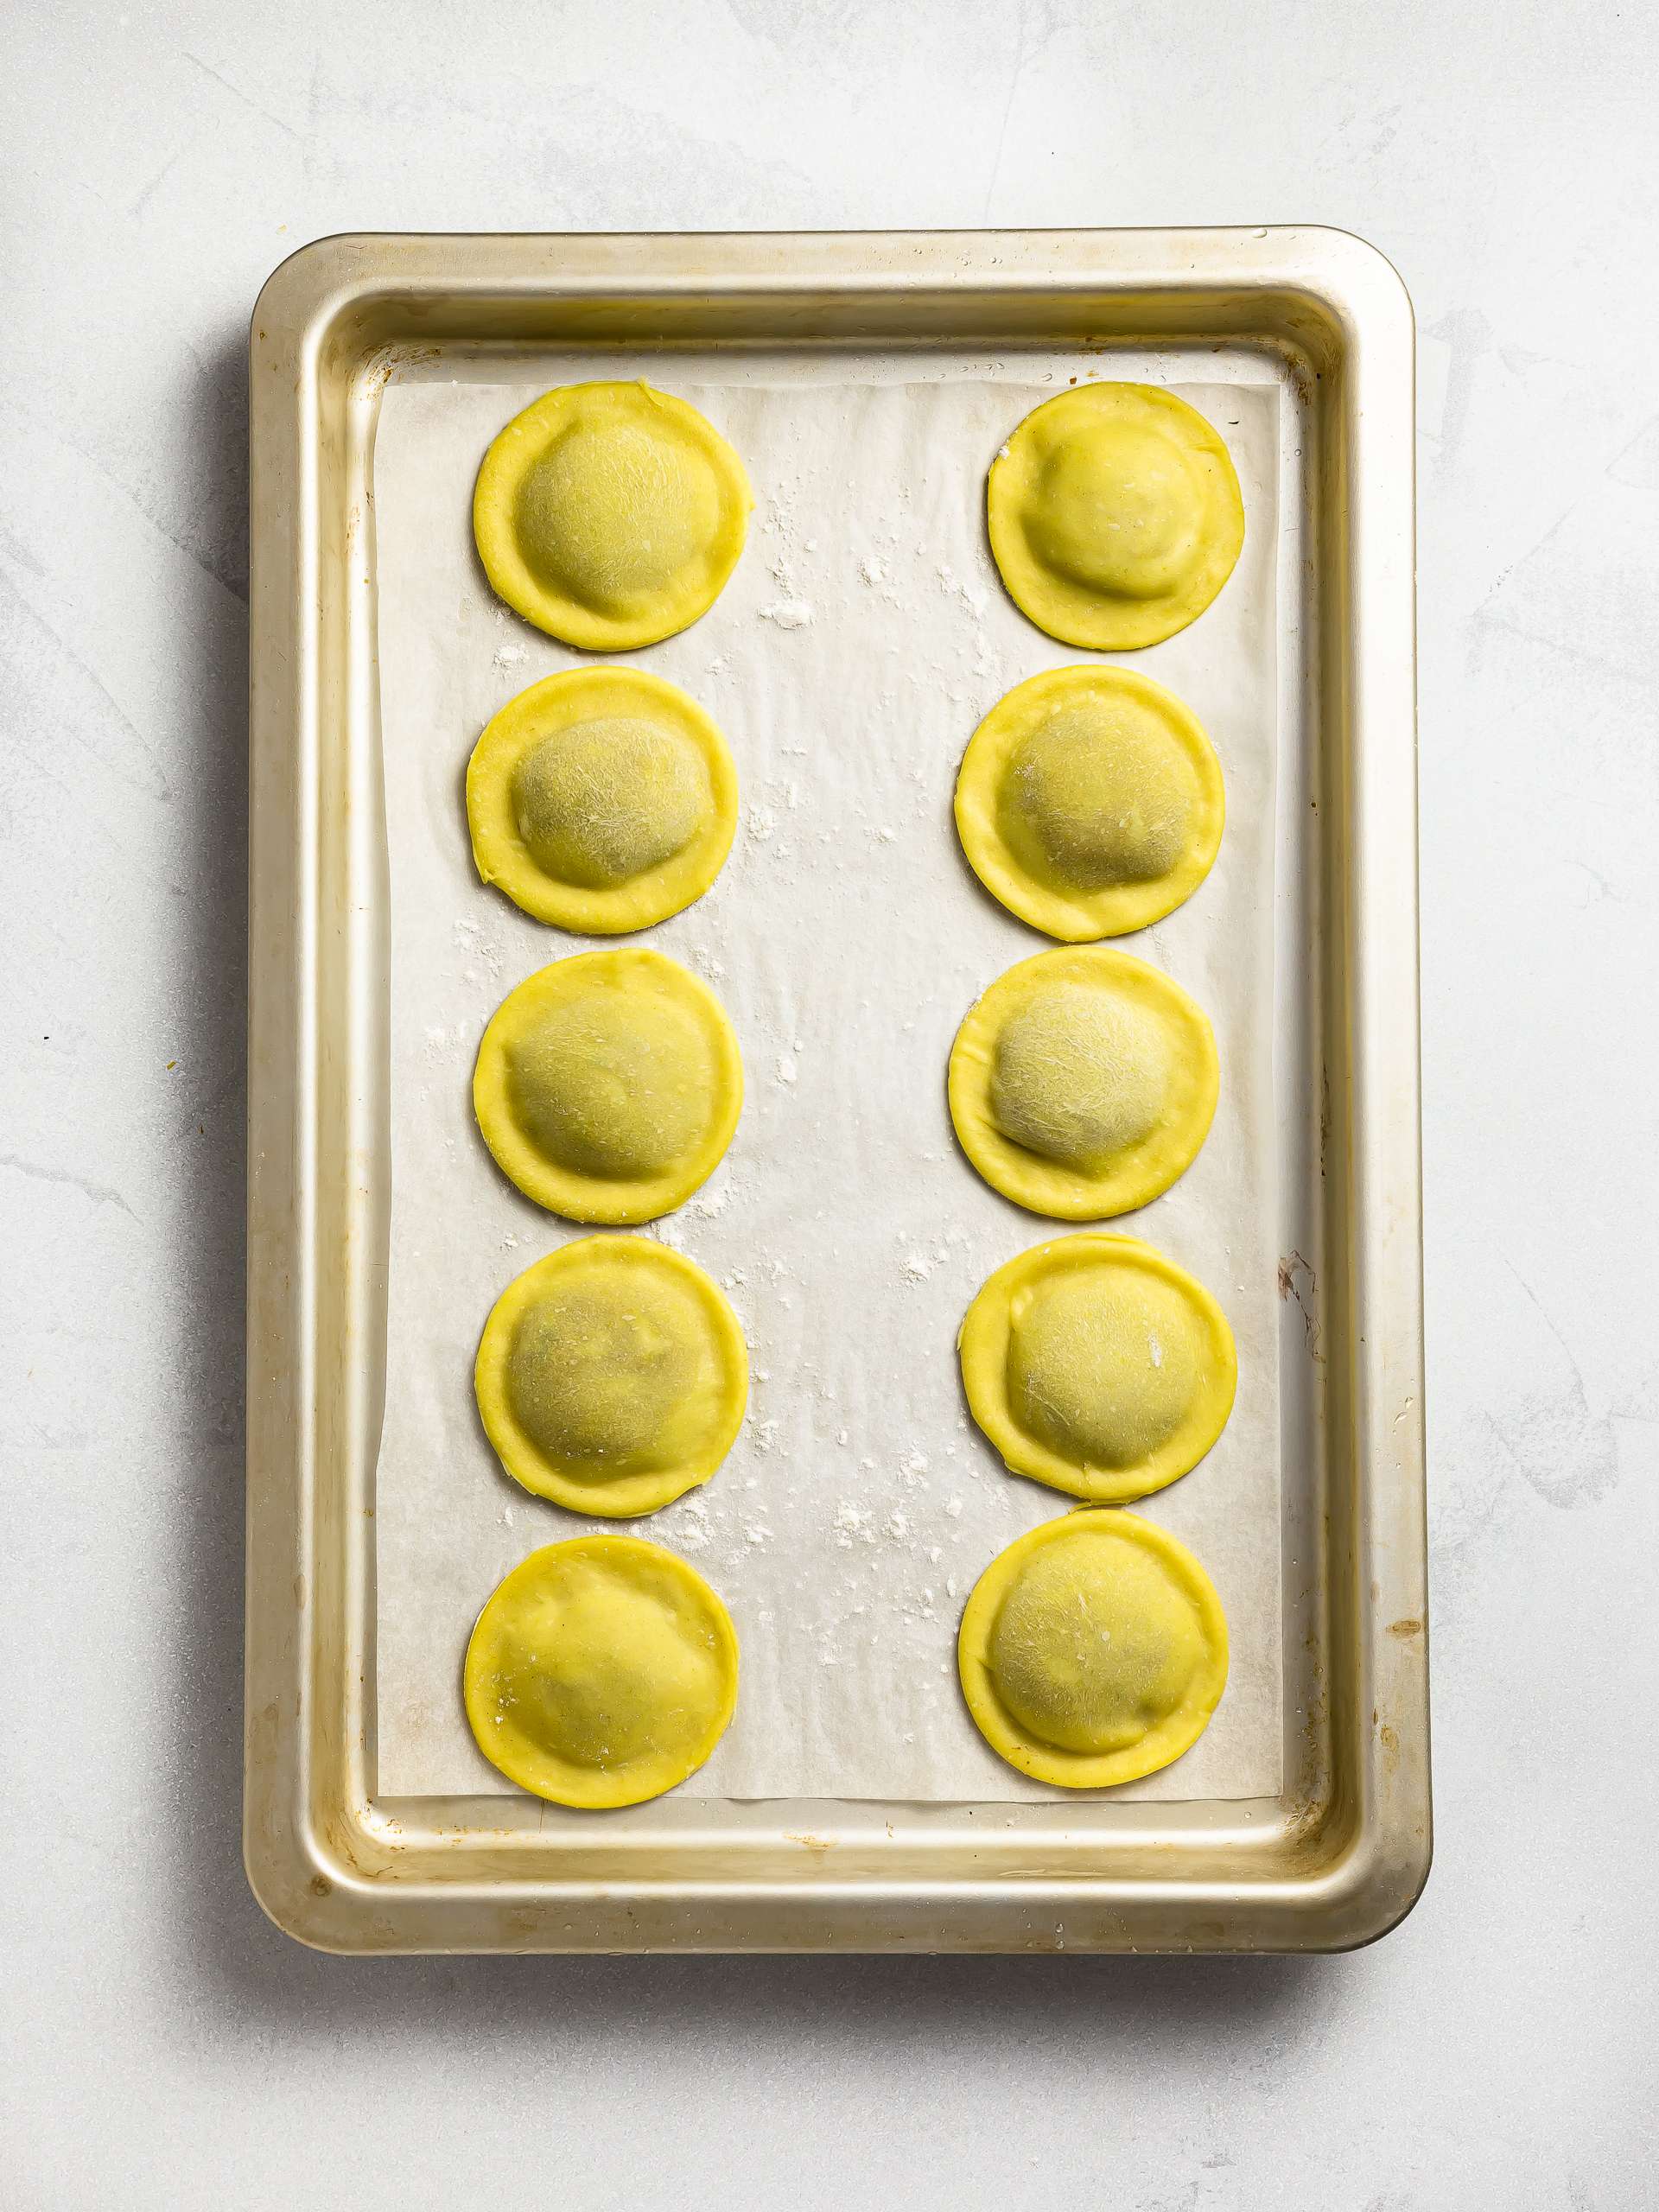 uncooked ravioli on a tray